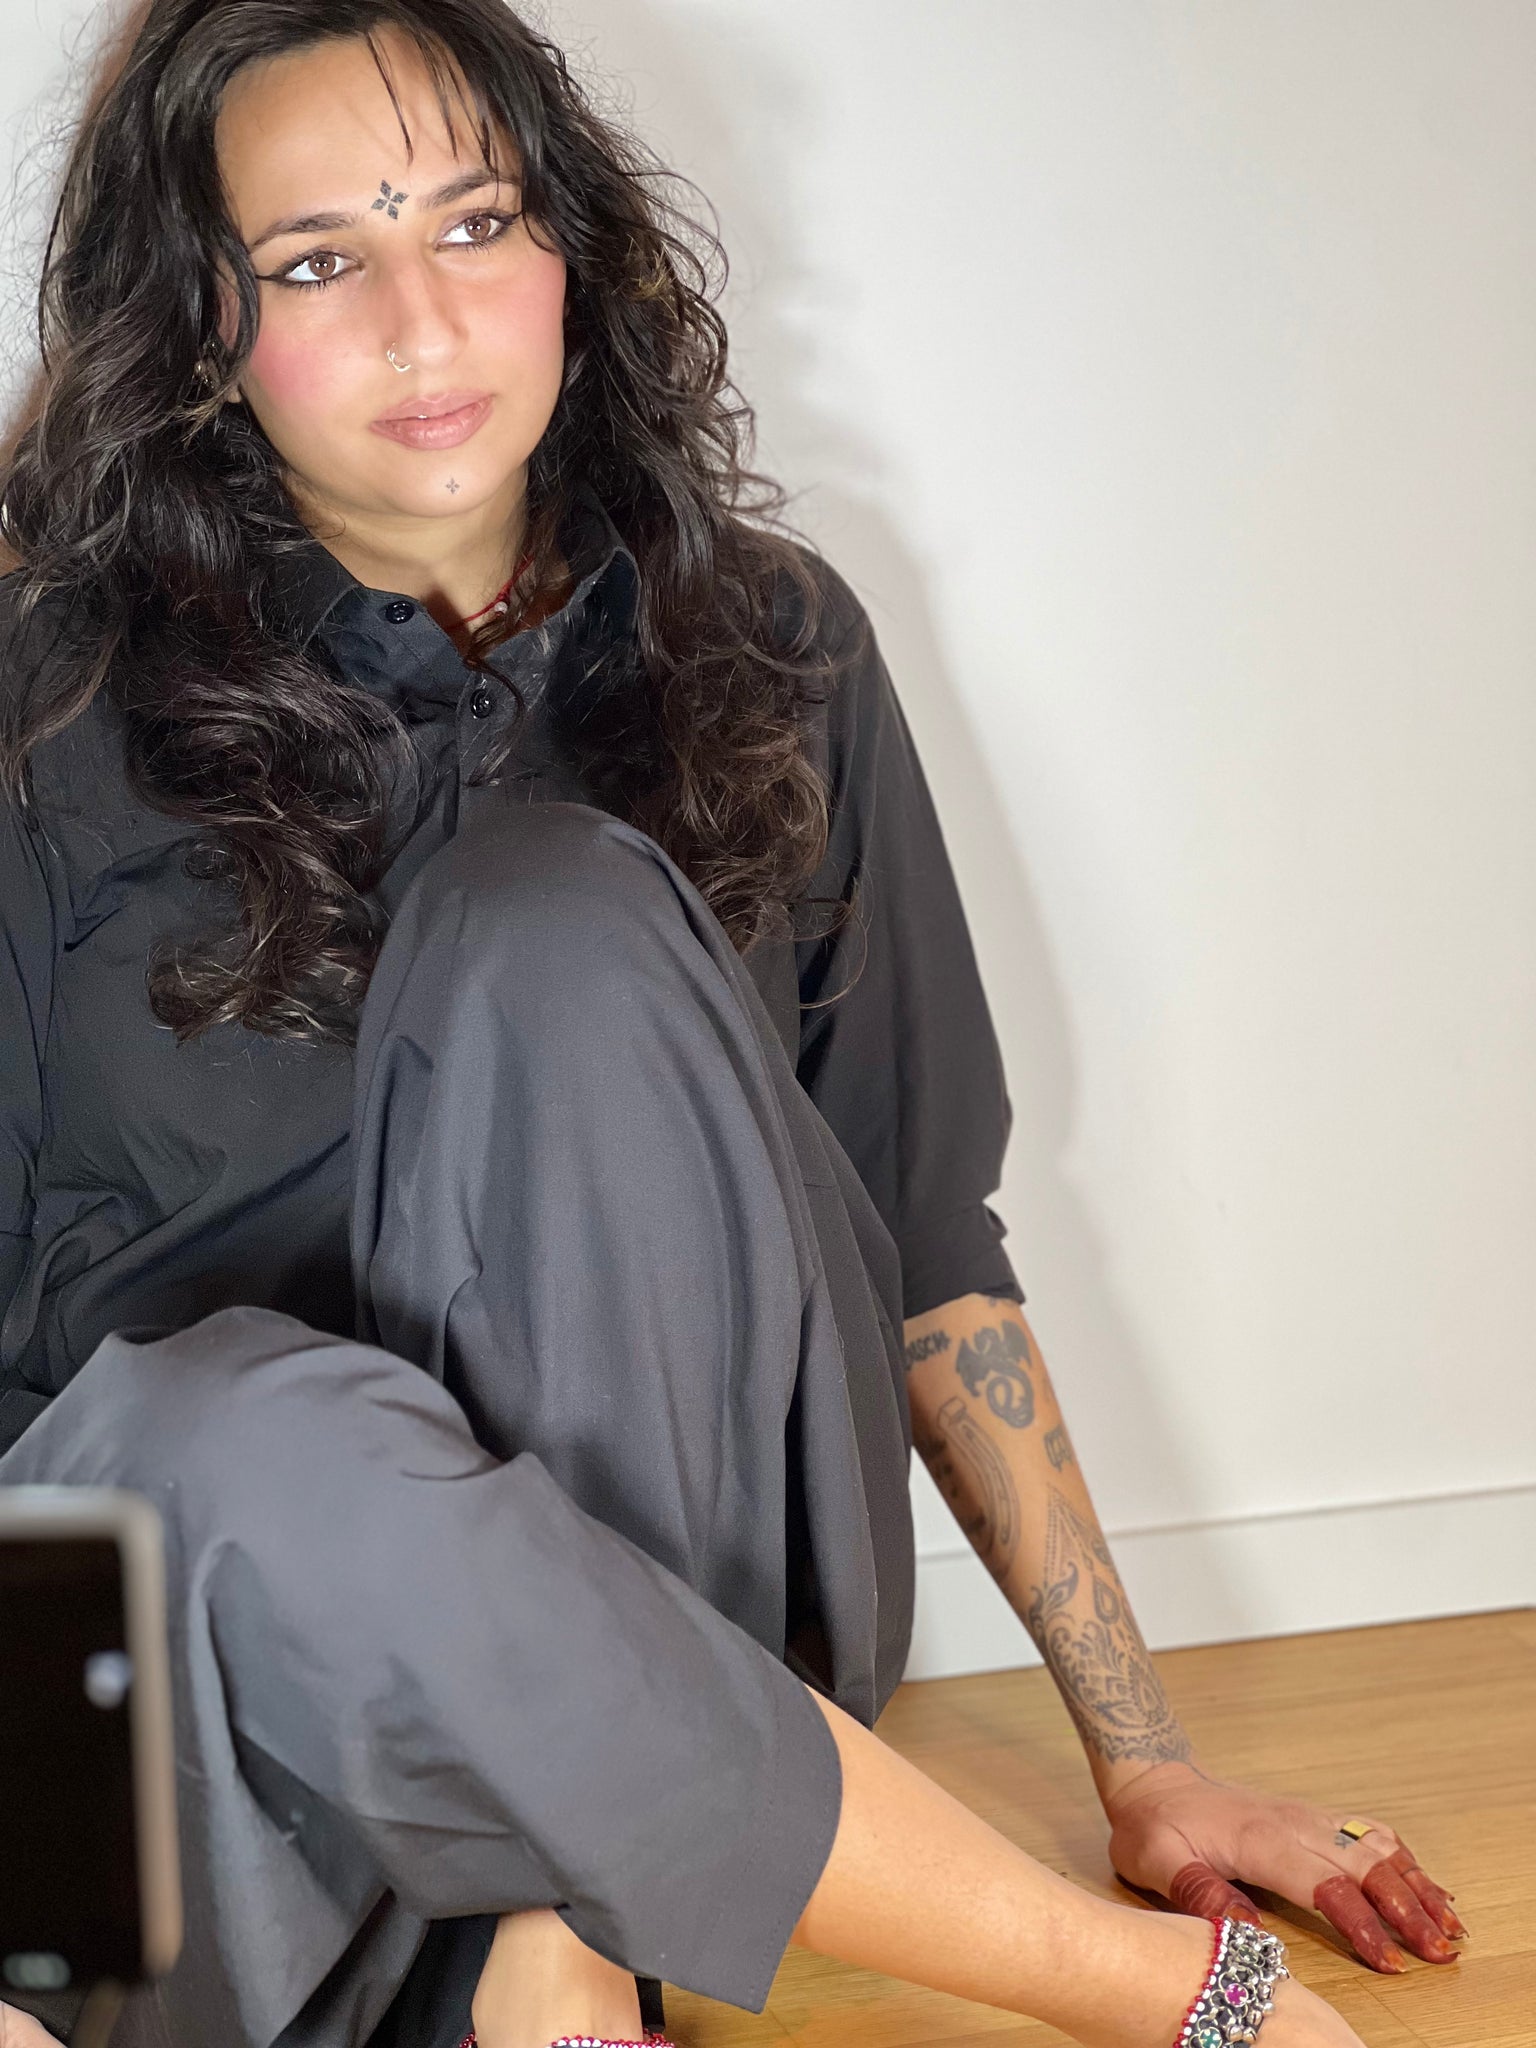 Woman in Afghan clothing looking away from the camera, a light near her crossed legs. 